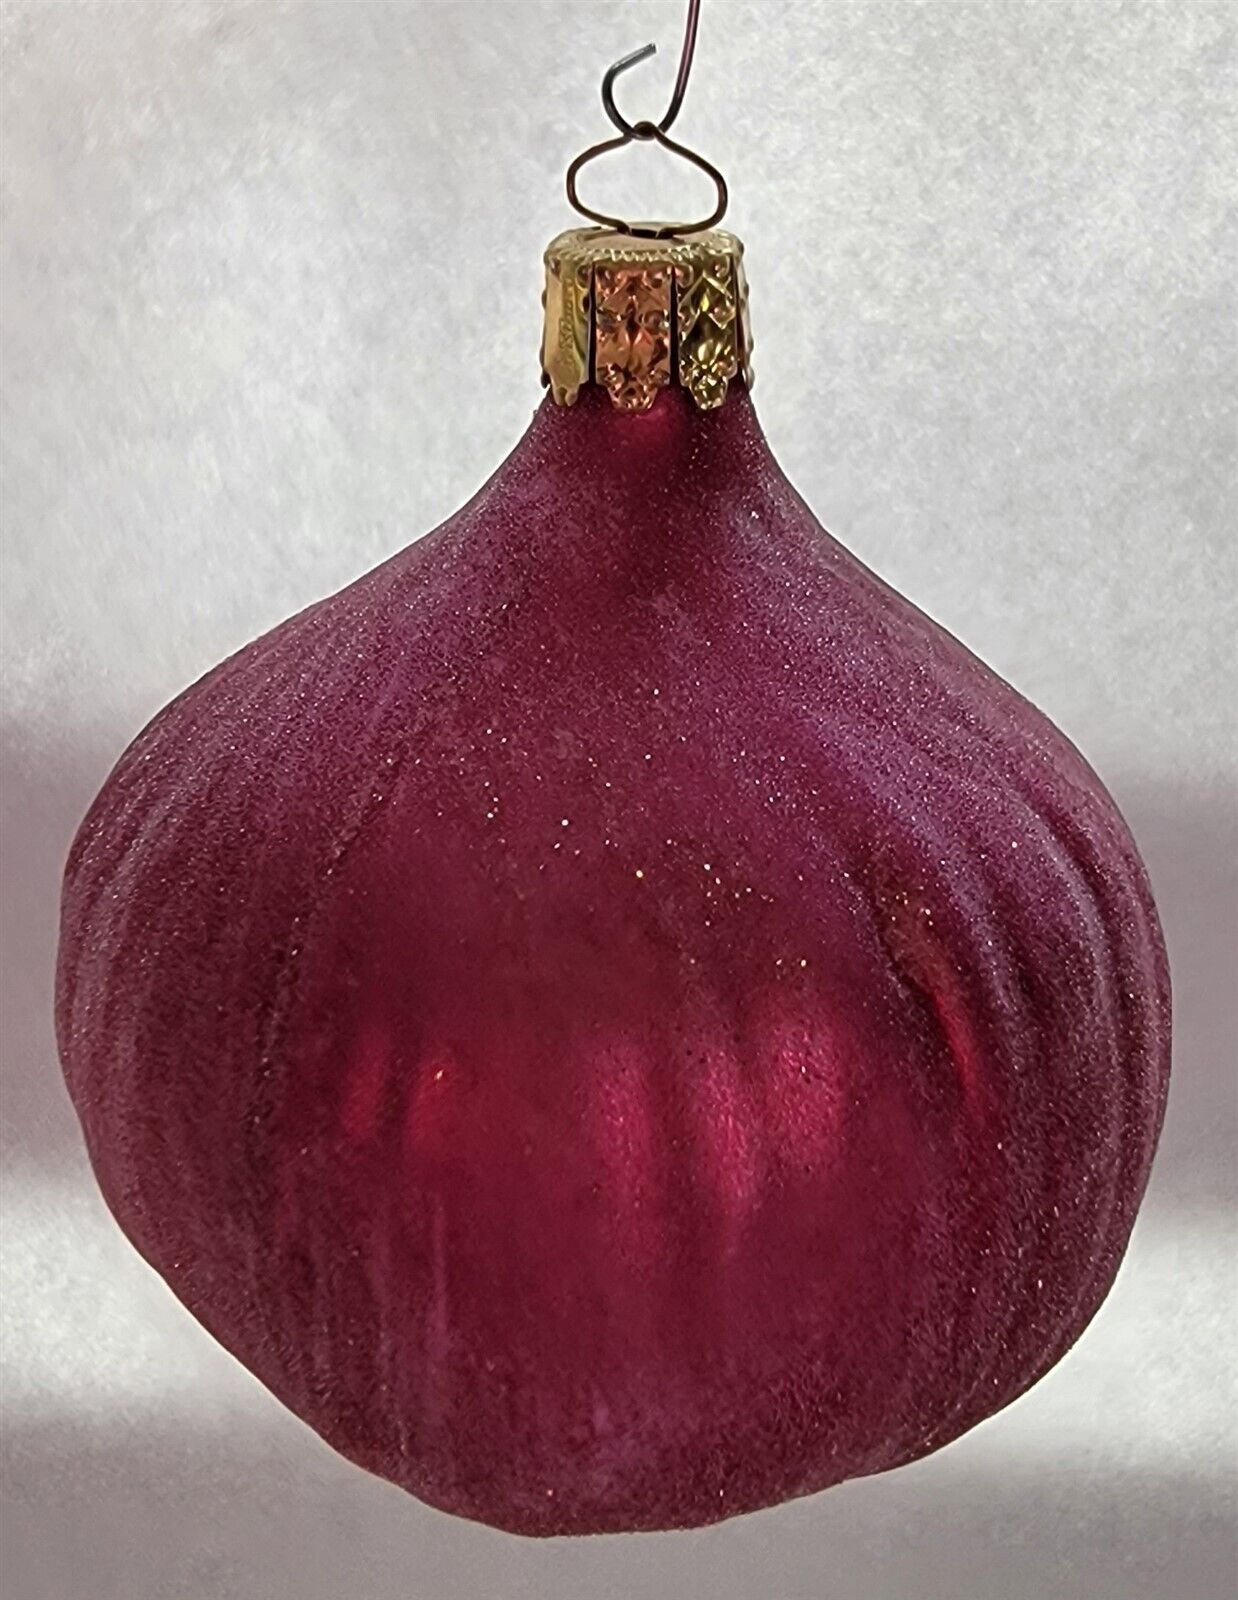 Vintage Christborn Red Onion Blown Glass Christmas Ornament Made in Germany